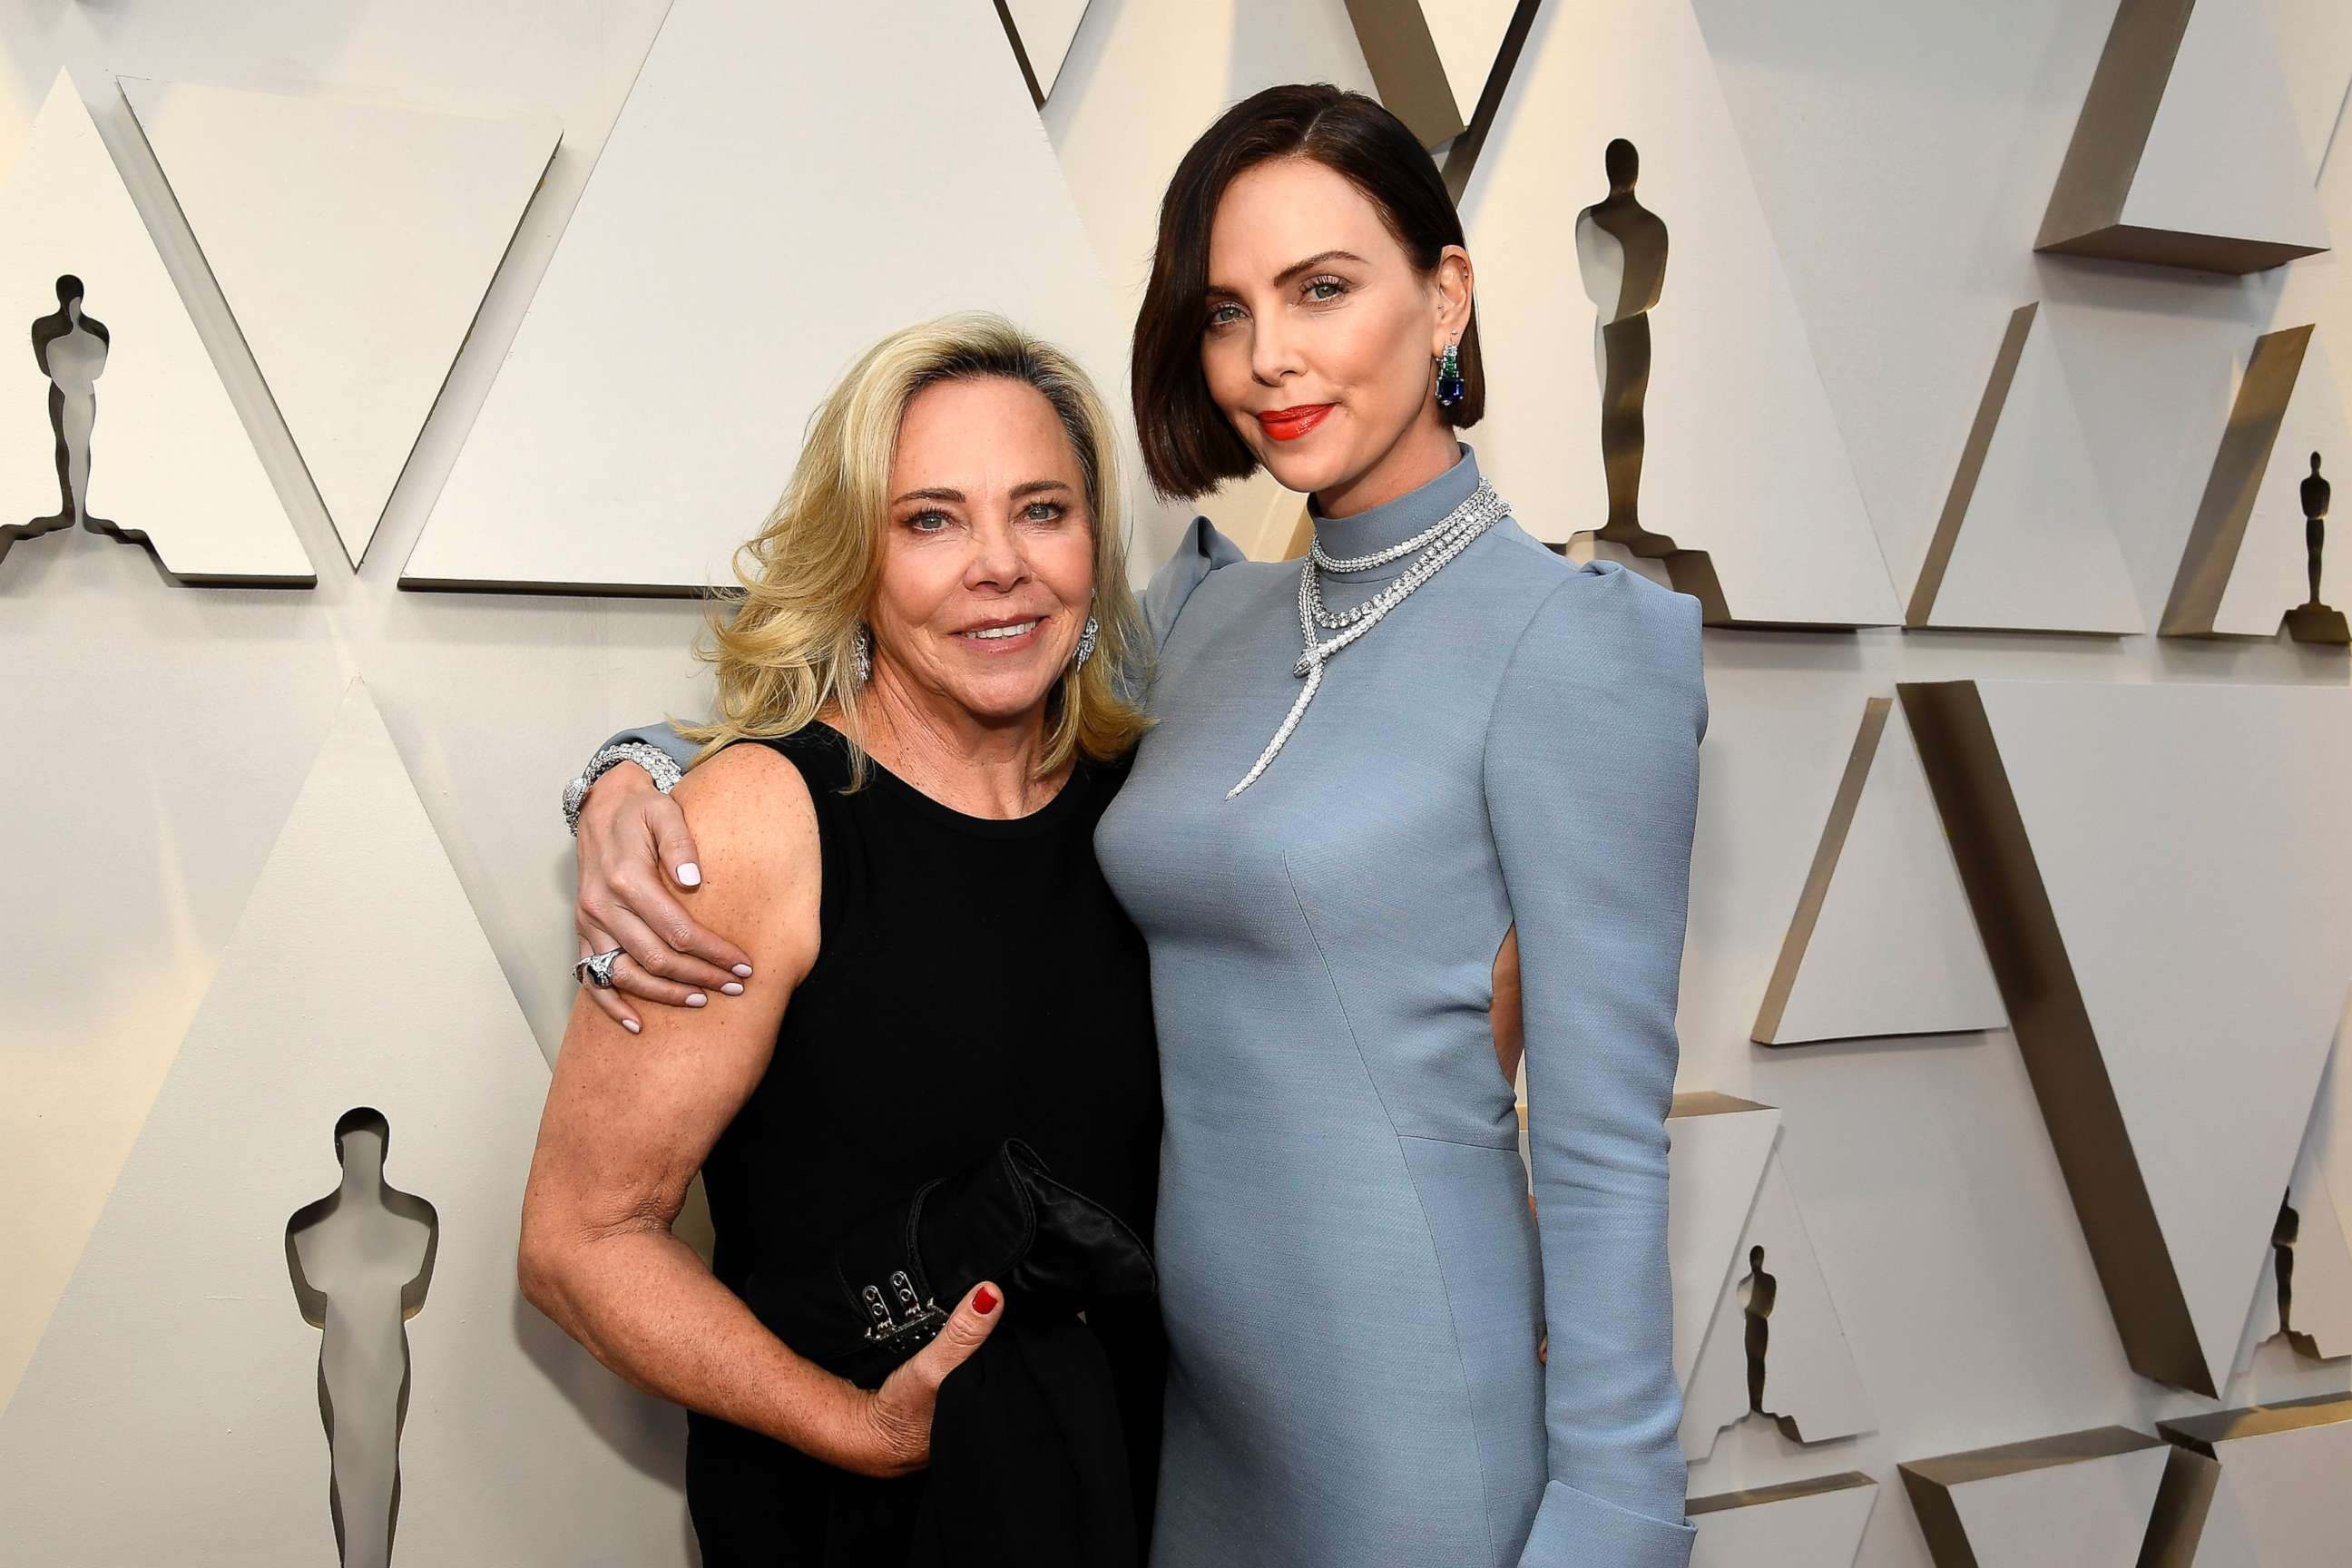 PHOTO: Gerda Moritz and Charlize Theron attend the 91st Annual Academy Awards at Hollywood and Highland, Feb. 24, 2019, in Hollywood, Calif.